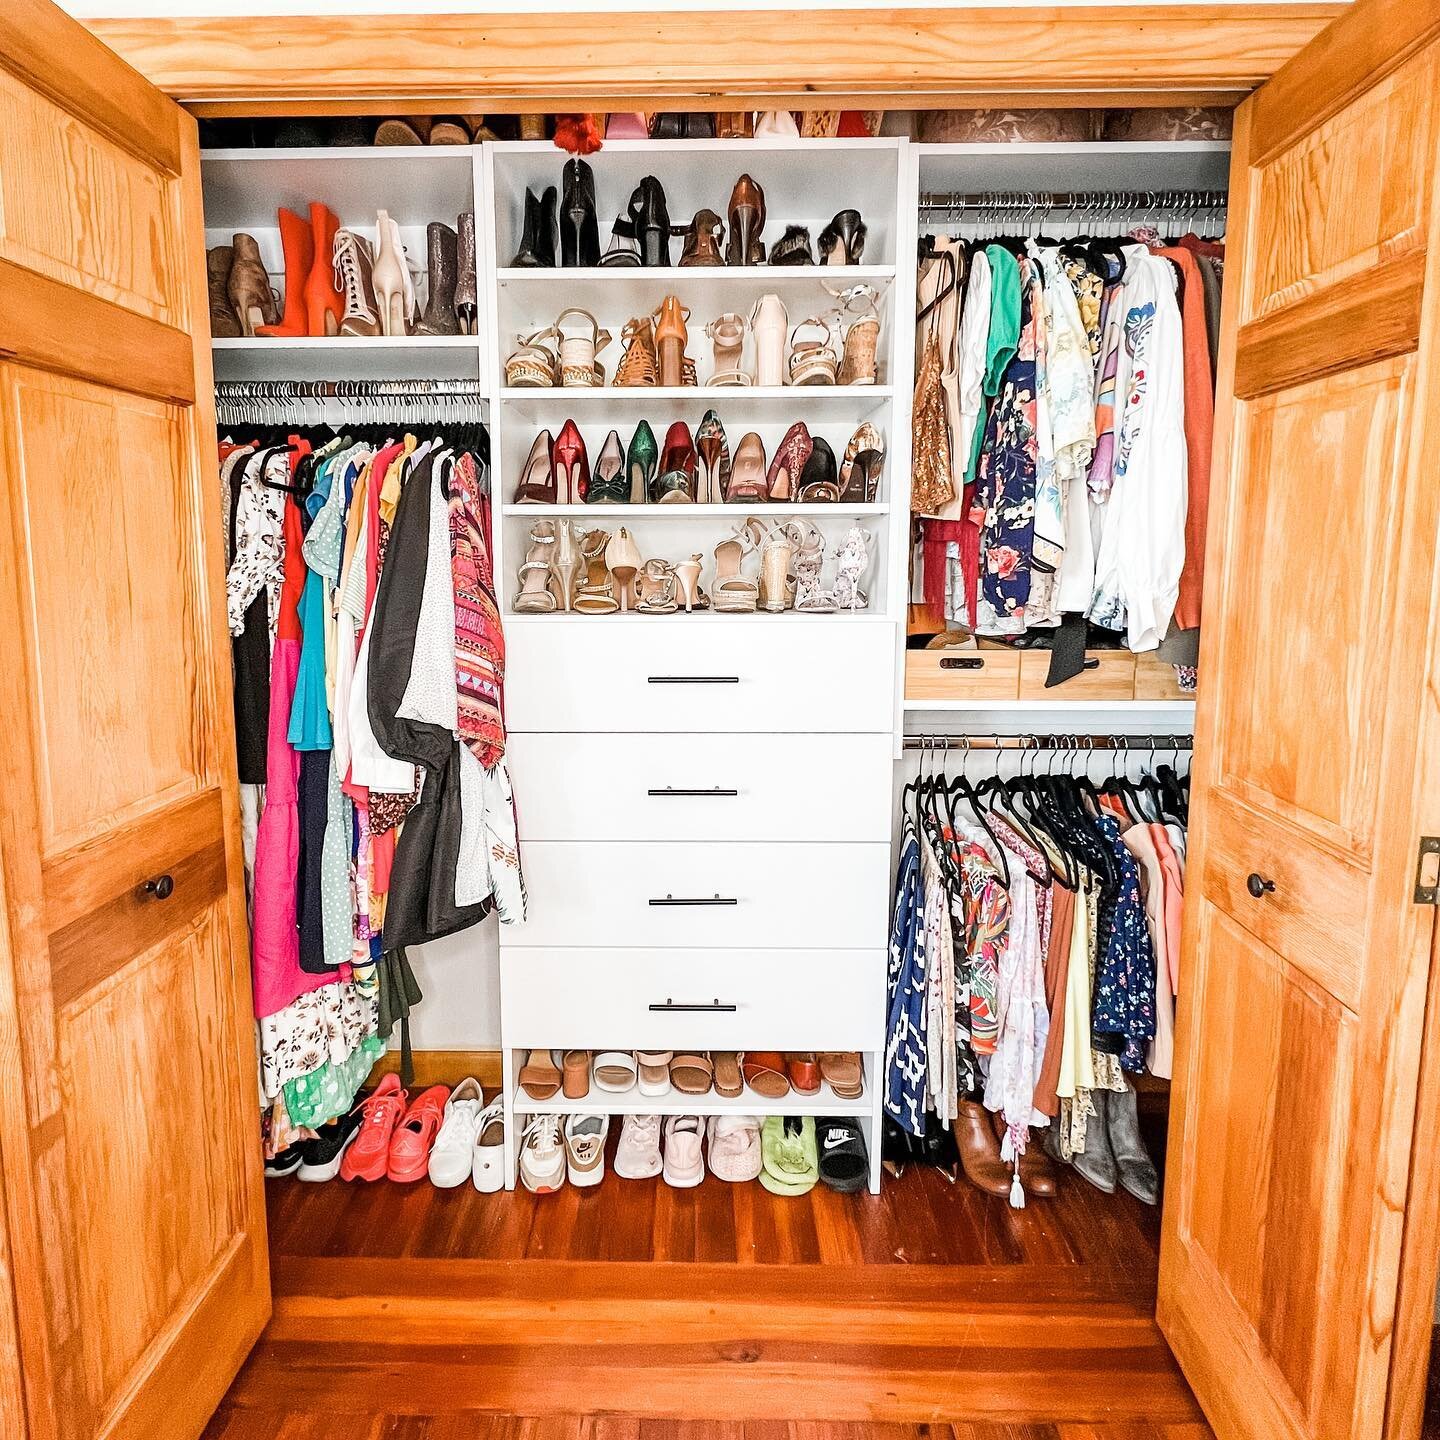 Here are some before / after pics of @cooking_con_omi closet, for those of you who prefer photos over reals. Swipe to the end 😉💗 Tell me what space in your home would you love to transform? 
.
.
.
#lillysorganizing #professionalorganizer #organizad